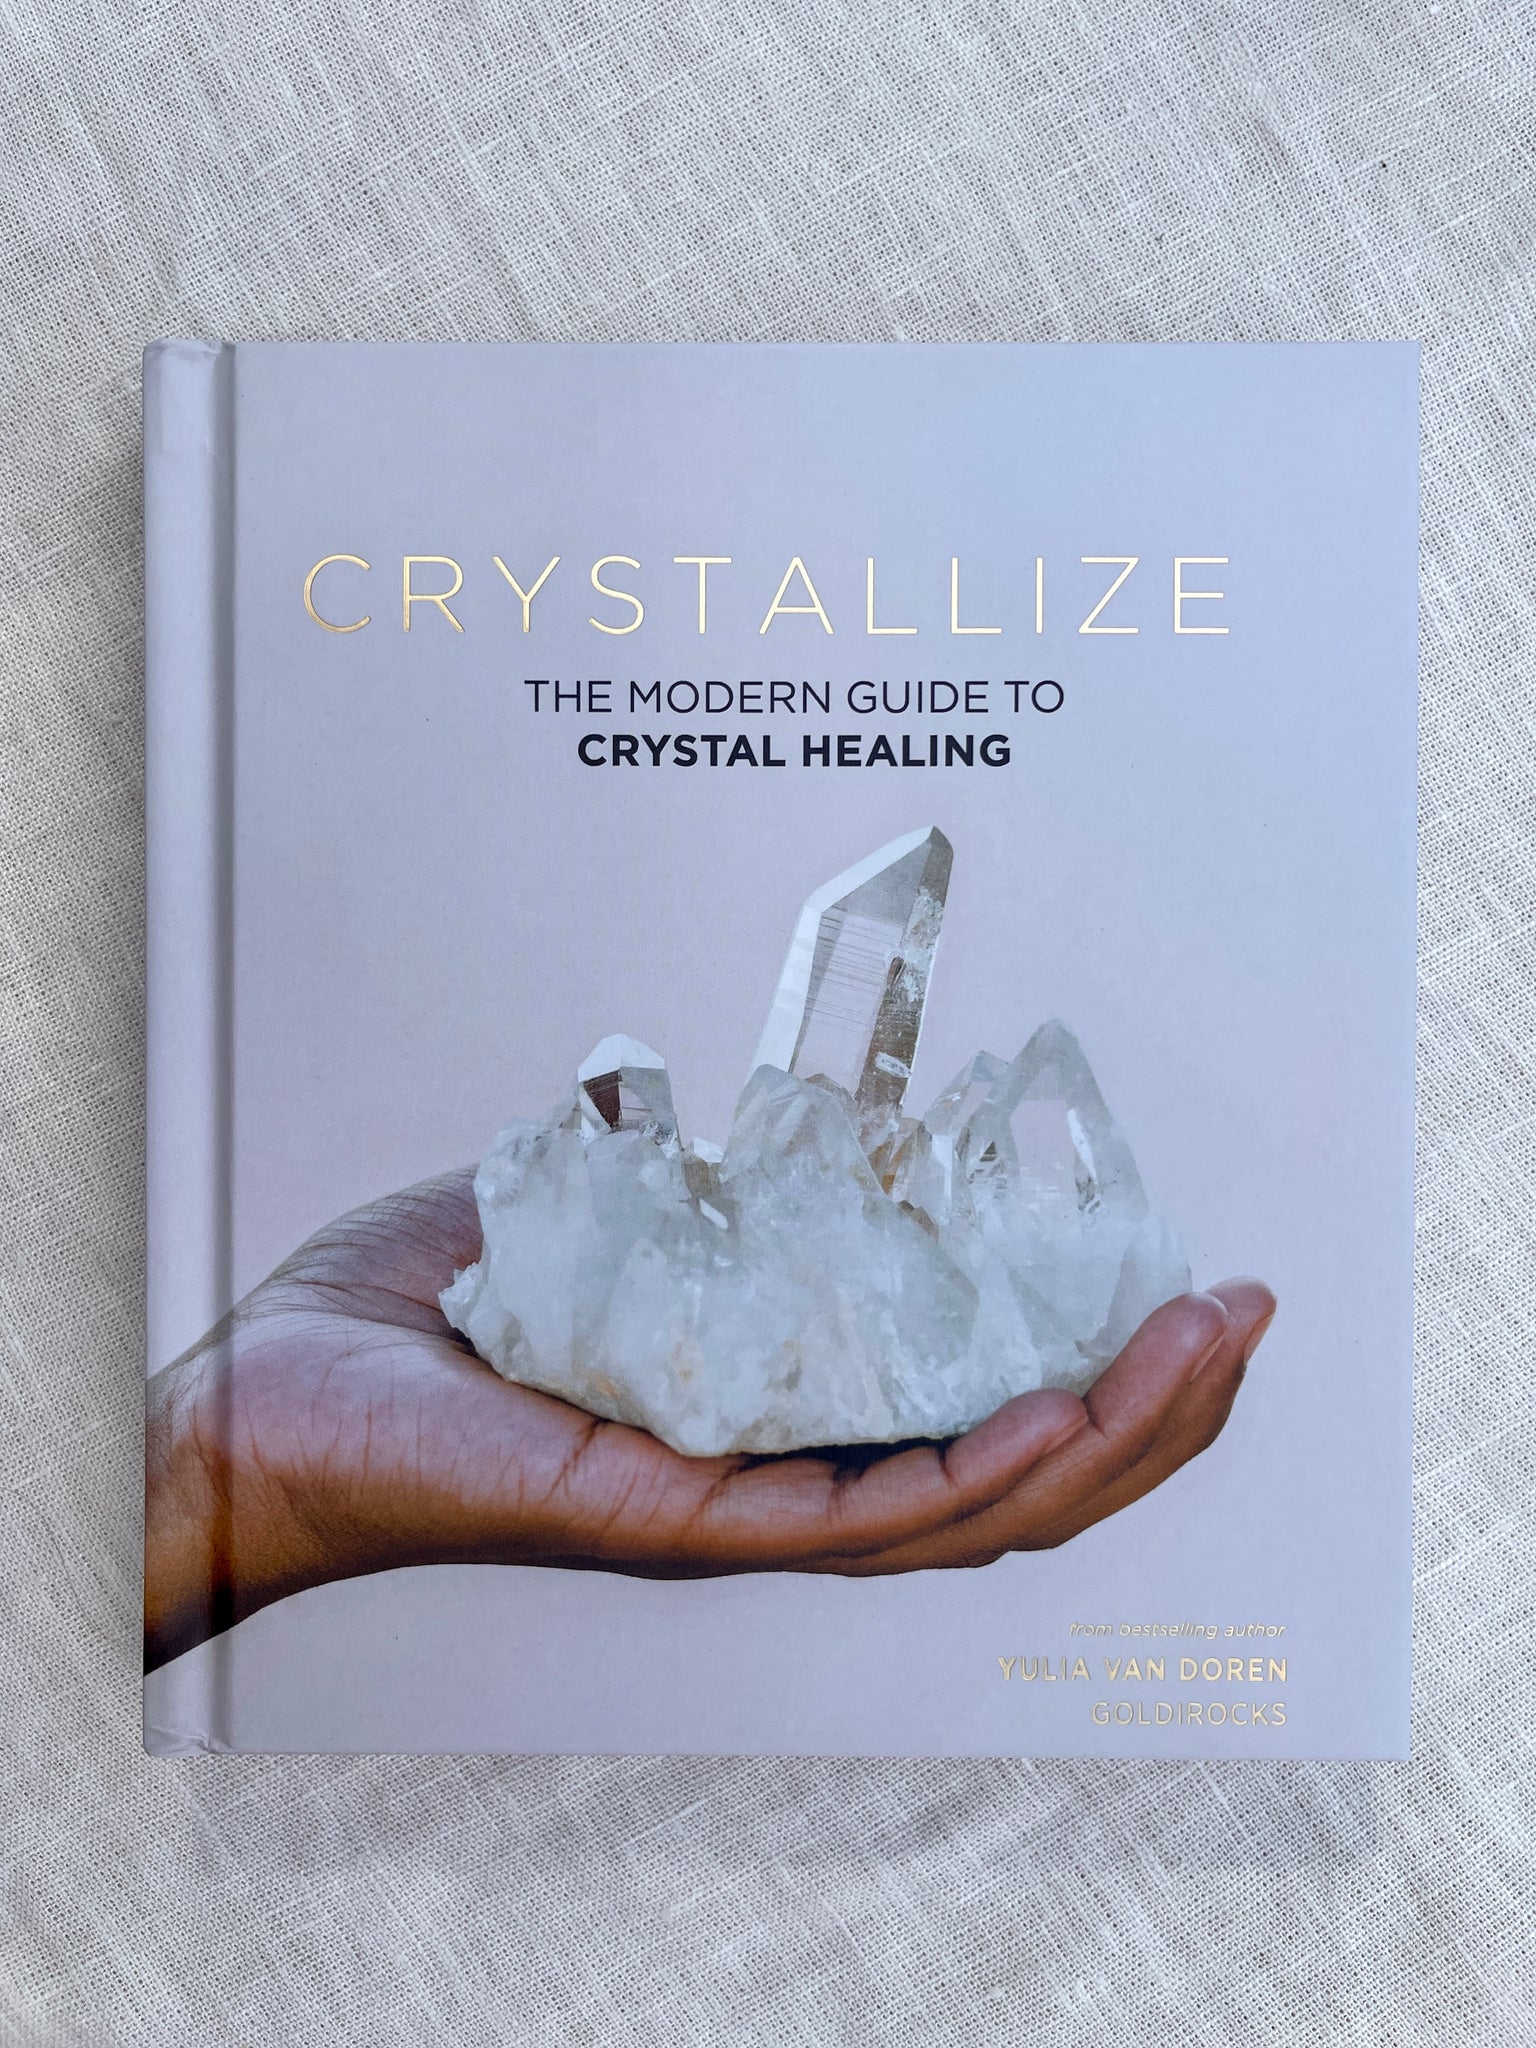 Crystallize: the Modern Guide to Crystal Healing